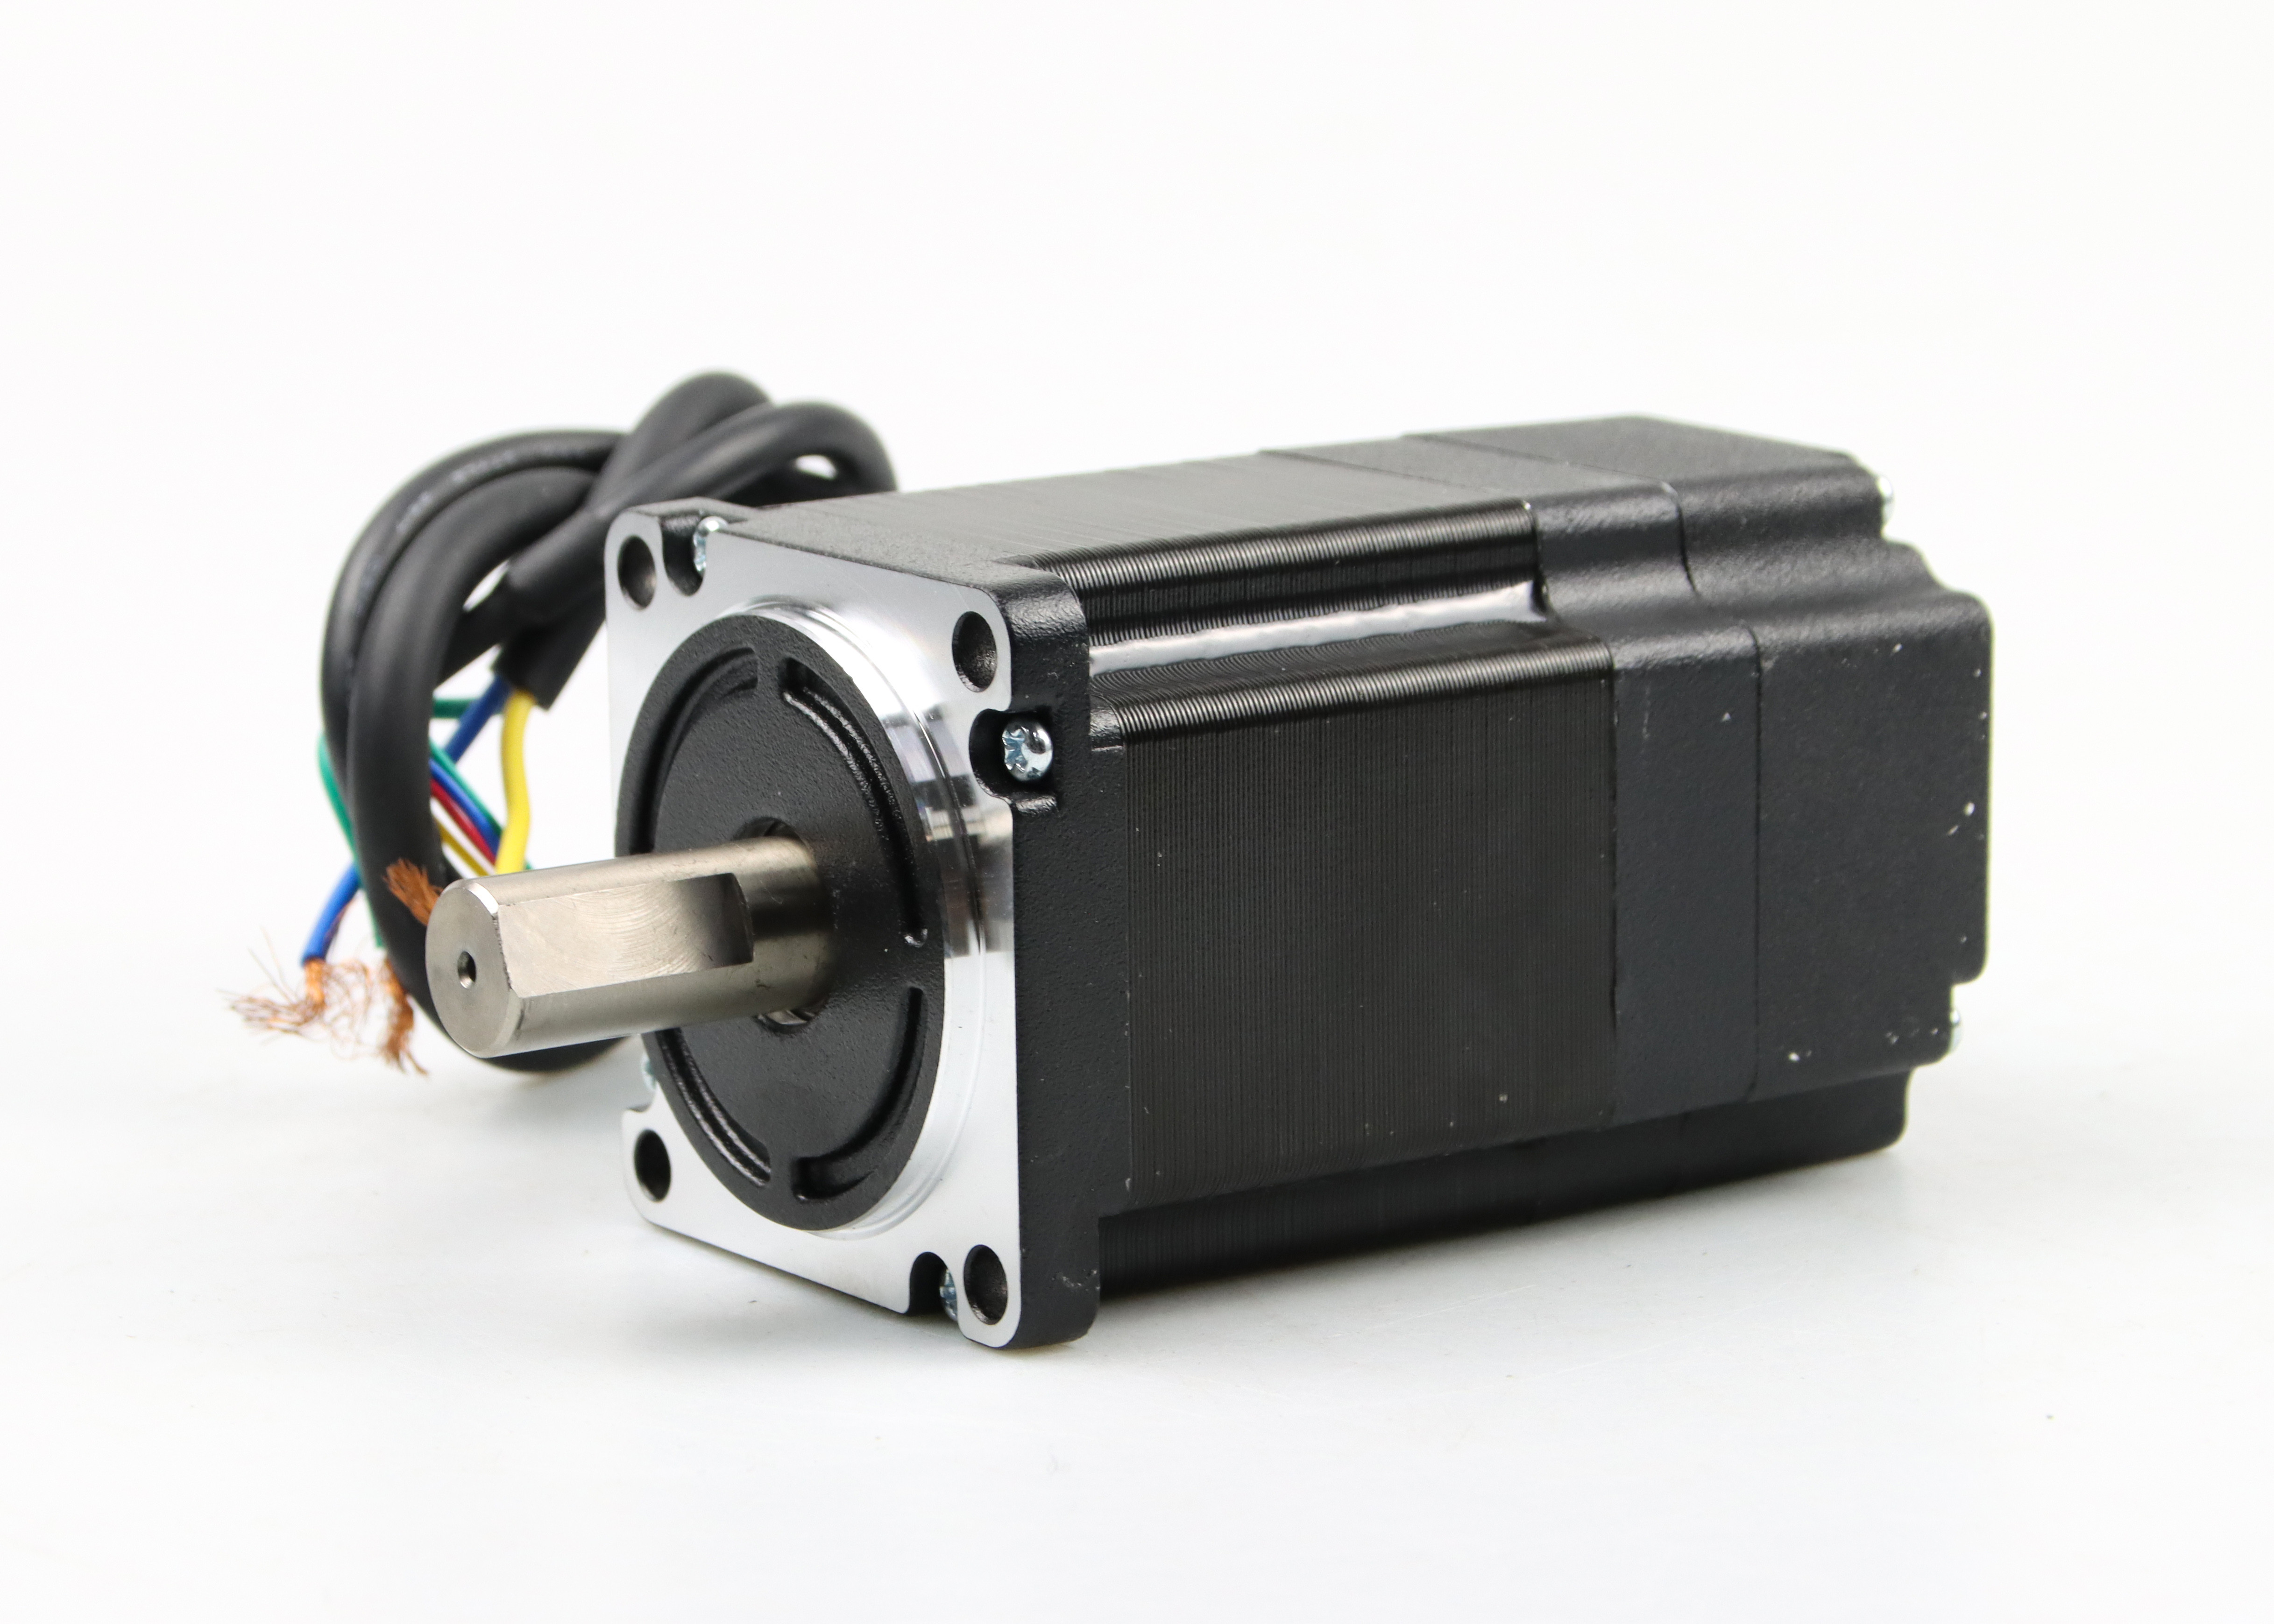 60mm Bldc Motor 188w 3000rpm Brushless DC Motor 48v With CE ROHS